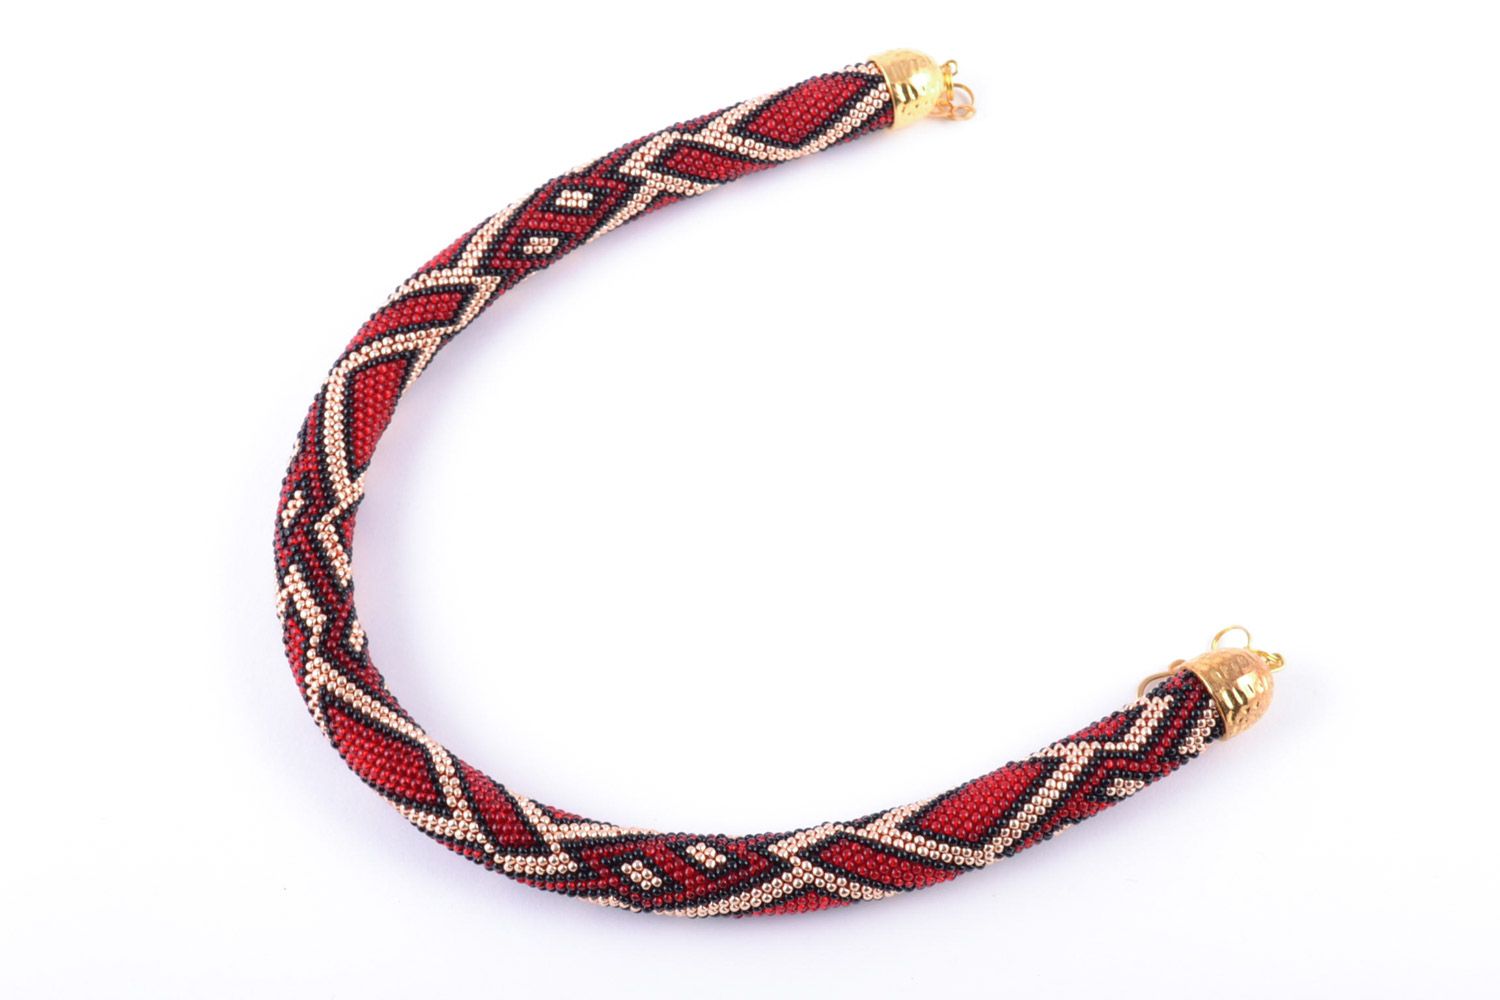 Handmade red Czech bead cord necklace with geometric patterns photo 4